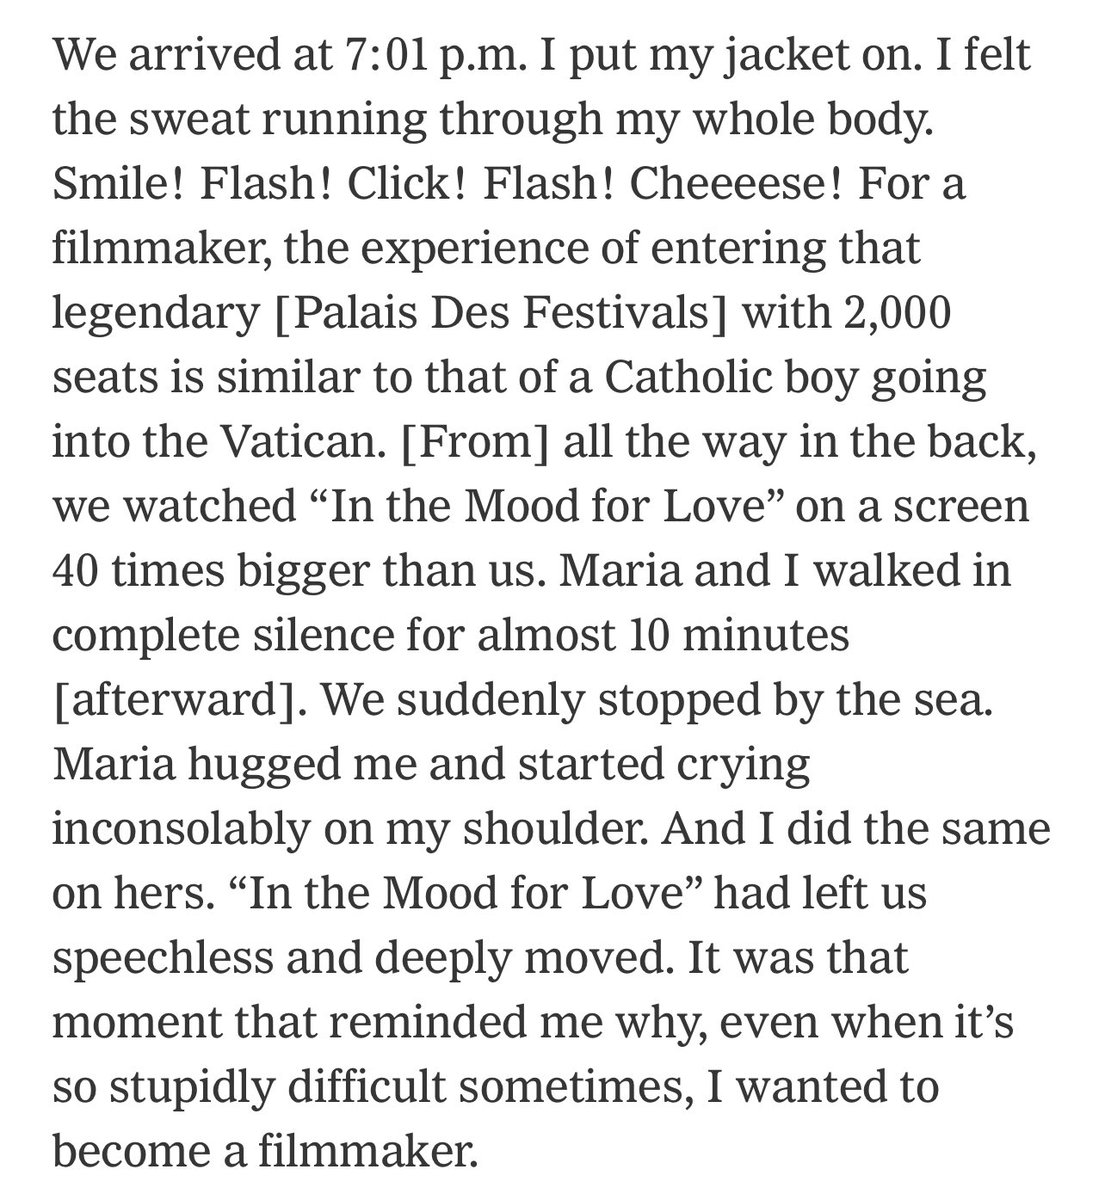 On the 24th anniversary of In the Mood for Love’s premiere, here’s an anecdote by Alejandro Gonalzález Iñárritu about watching it at Cannes.